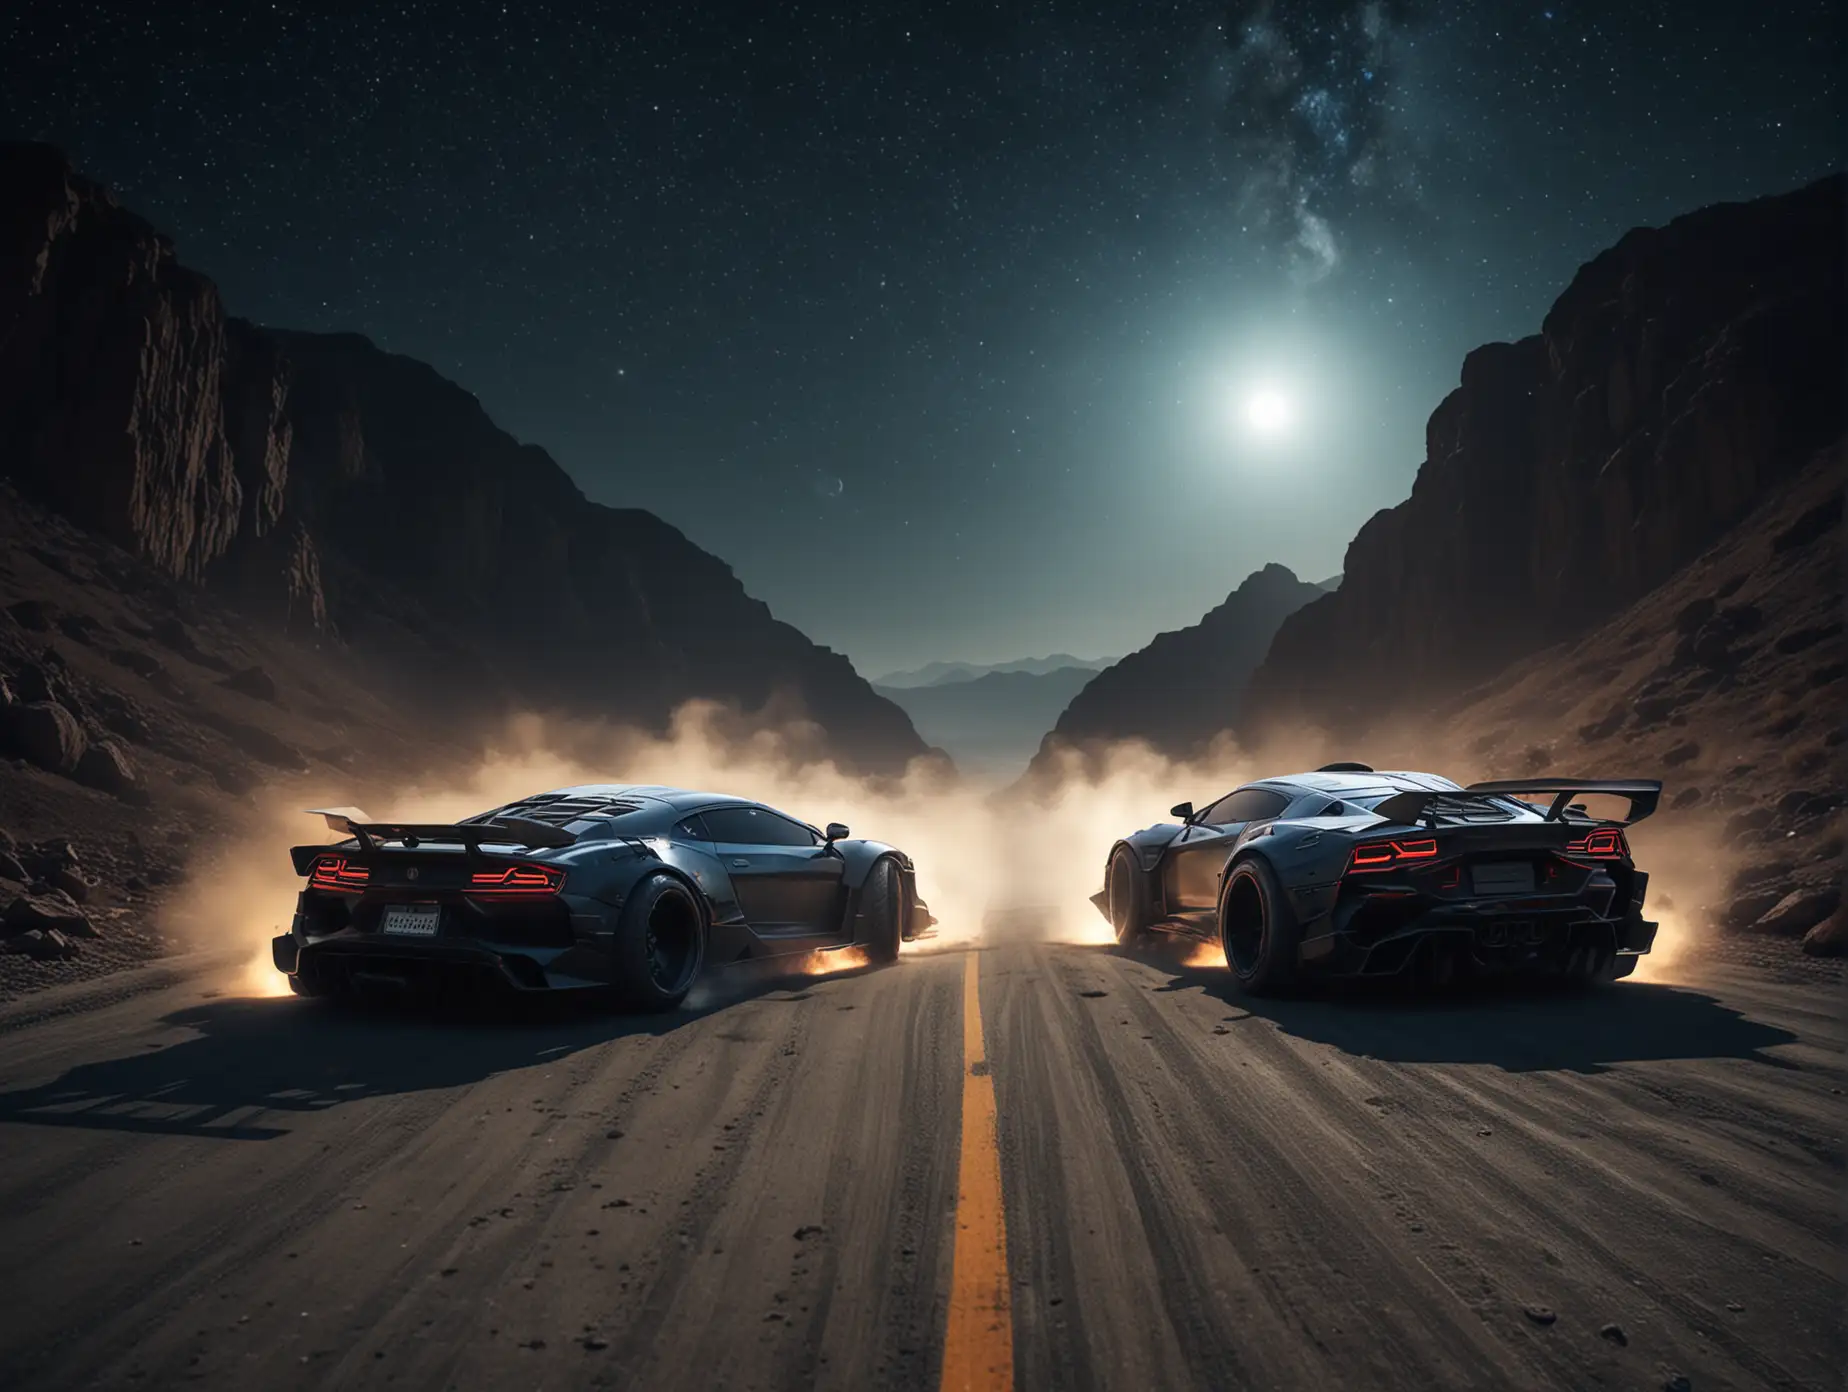 Create futuristic turning drifting cars from tiger and lion, view from rear, drifting  in biggest planet in universe I want to see planet Earth in the background, car lights  dark indigo, lightning car colour black, drifting on downhill on Greece 